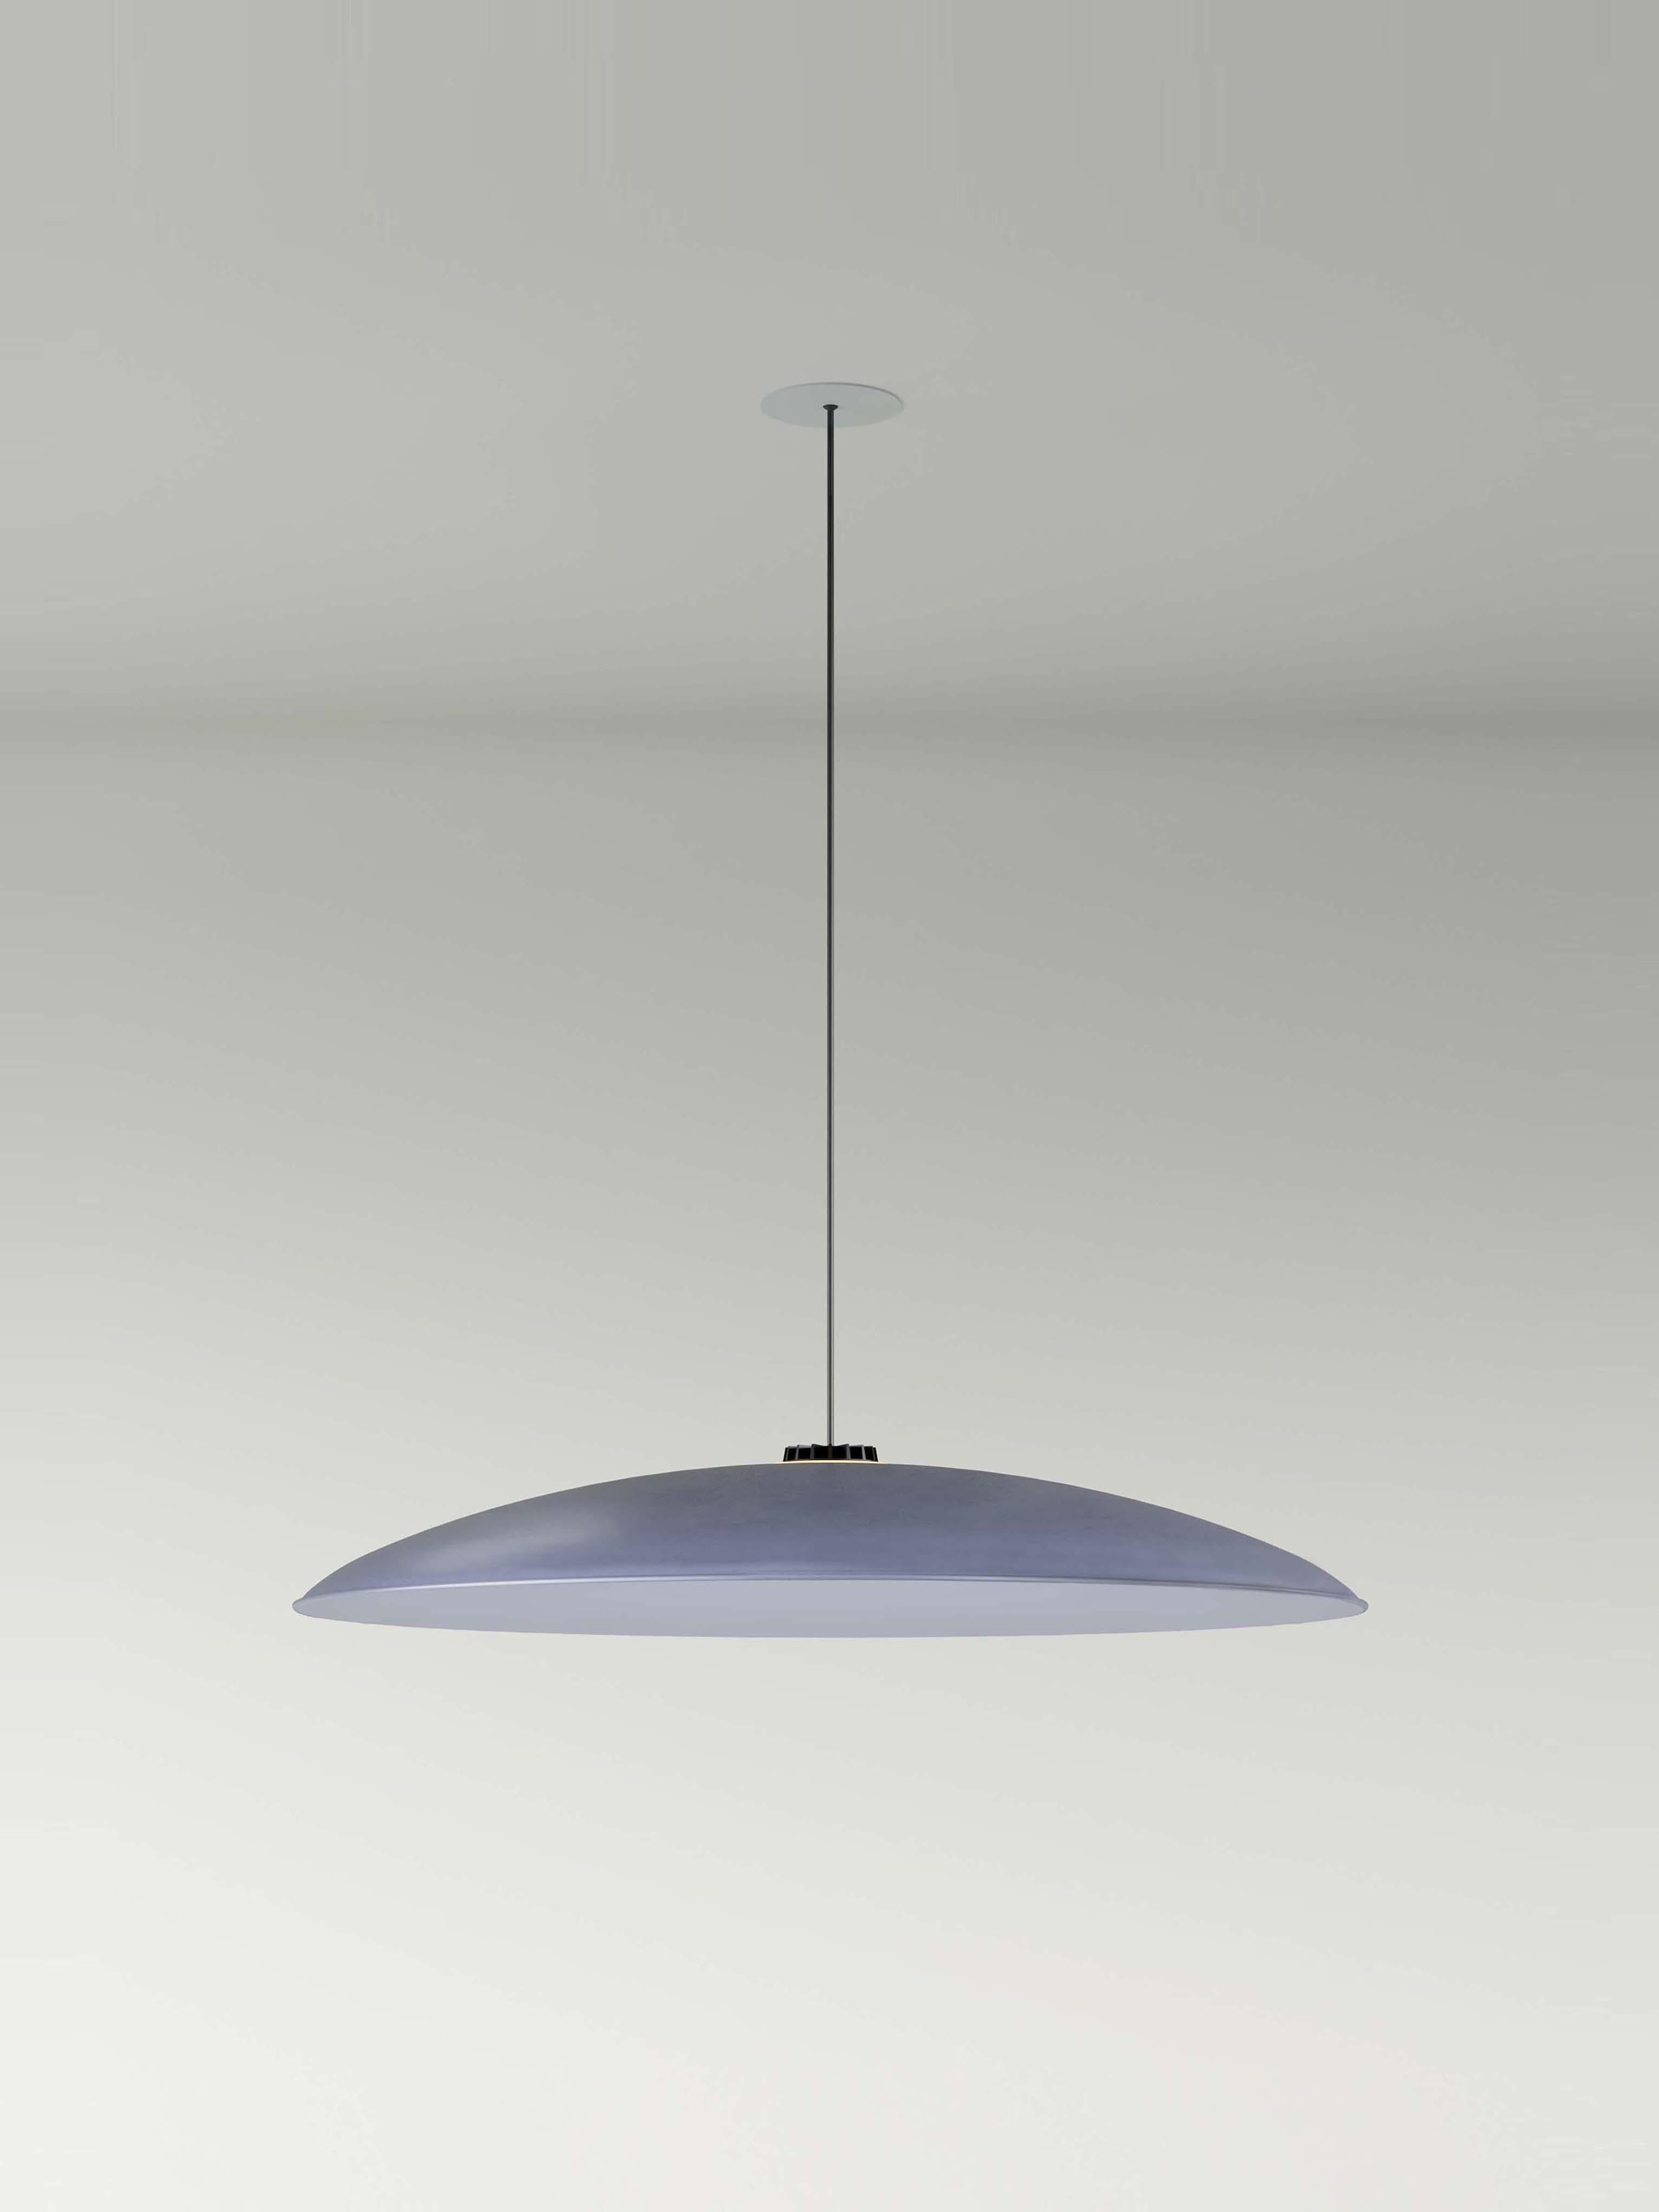 Large blue headhat plate pendant lamp by Santa & Cole
Dimensions: d 75 x h 11 cm
Materials: Metal.
Cable length: 3 meters.
Available in other colors and sizes. Available in 2 cable lengths: 3 meters, 8 meters.
Available in 2 canopy colors: